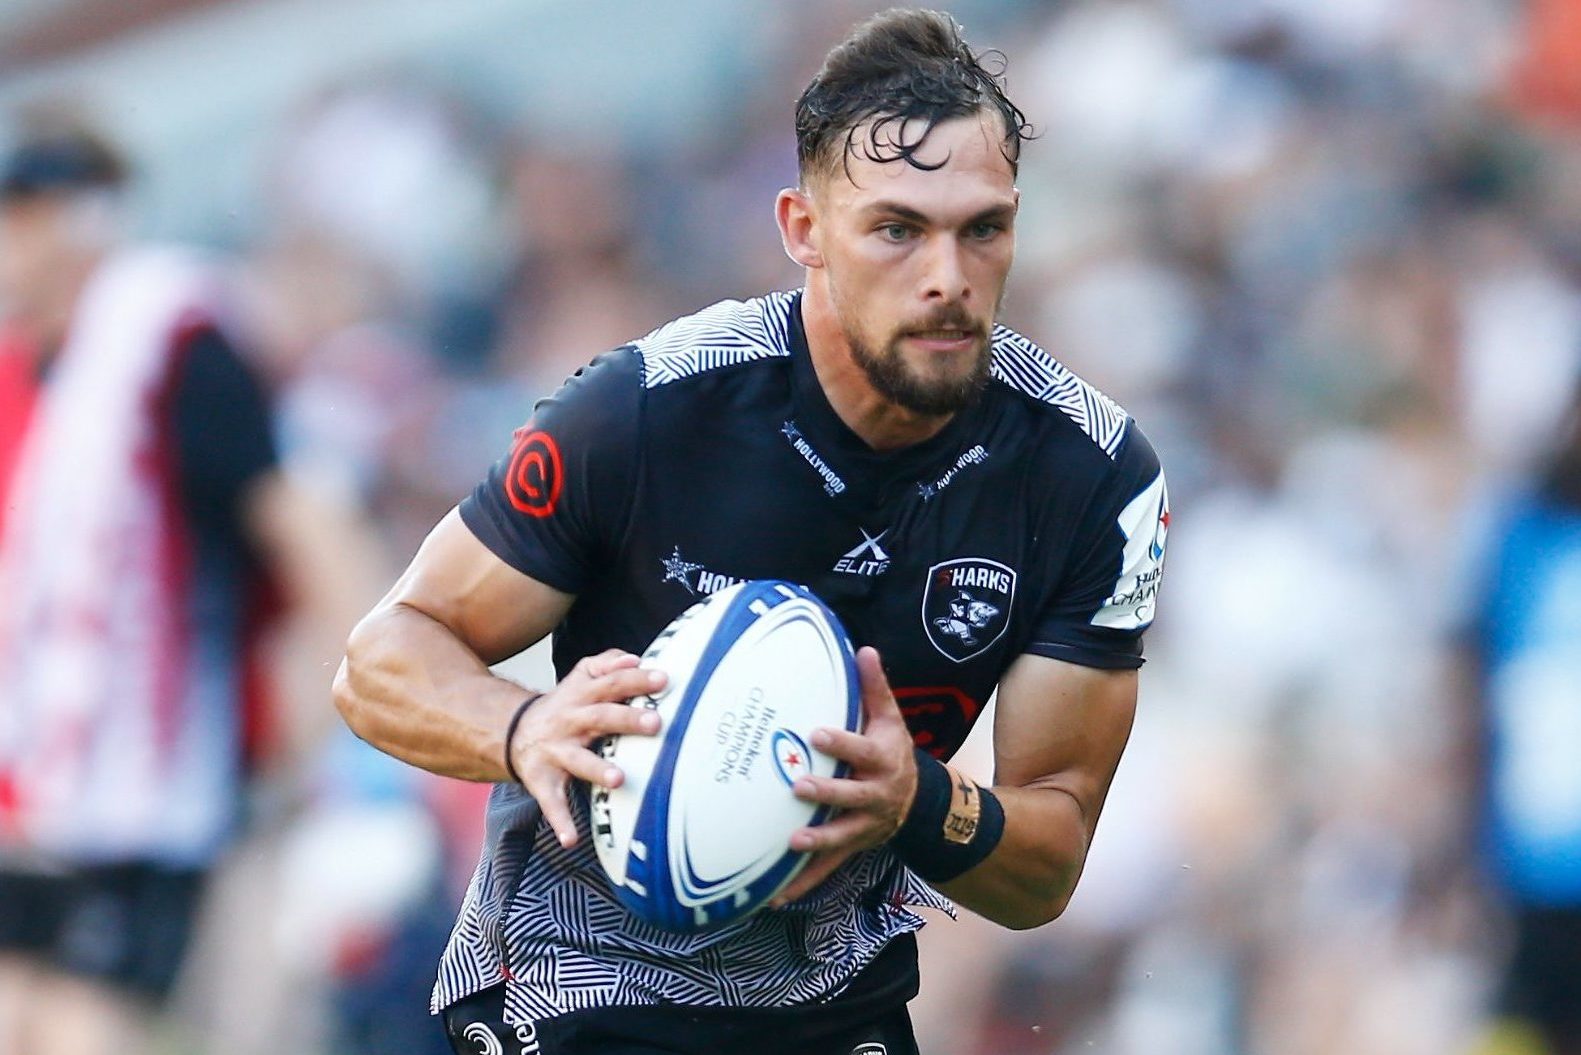 DURBAN, SOUTH AFRICA - JANUARY 14: Boeta Chamberlain of the Cell C Sharks during the Heineken Champions Cup match between Cell C Sharks and Union Bordeaux-Begles at Hollywoodbets Kings Park on January 14, 2023 in Durban, South Africa. (Photo by Steve Haag/Gallo Images)